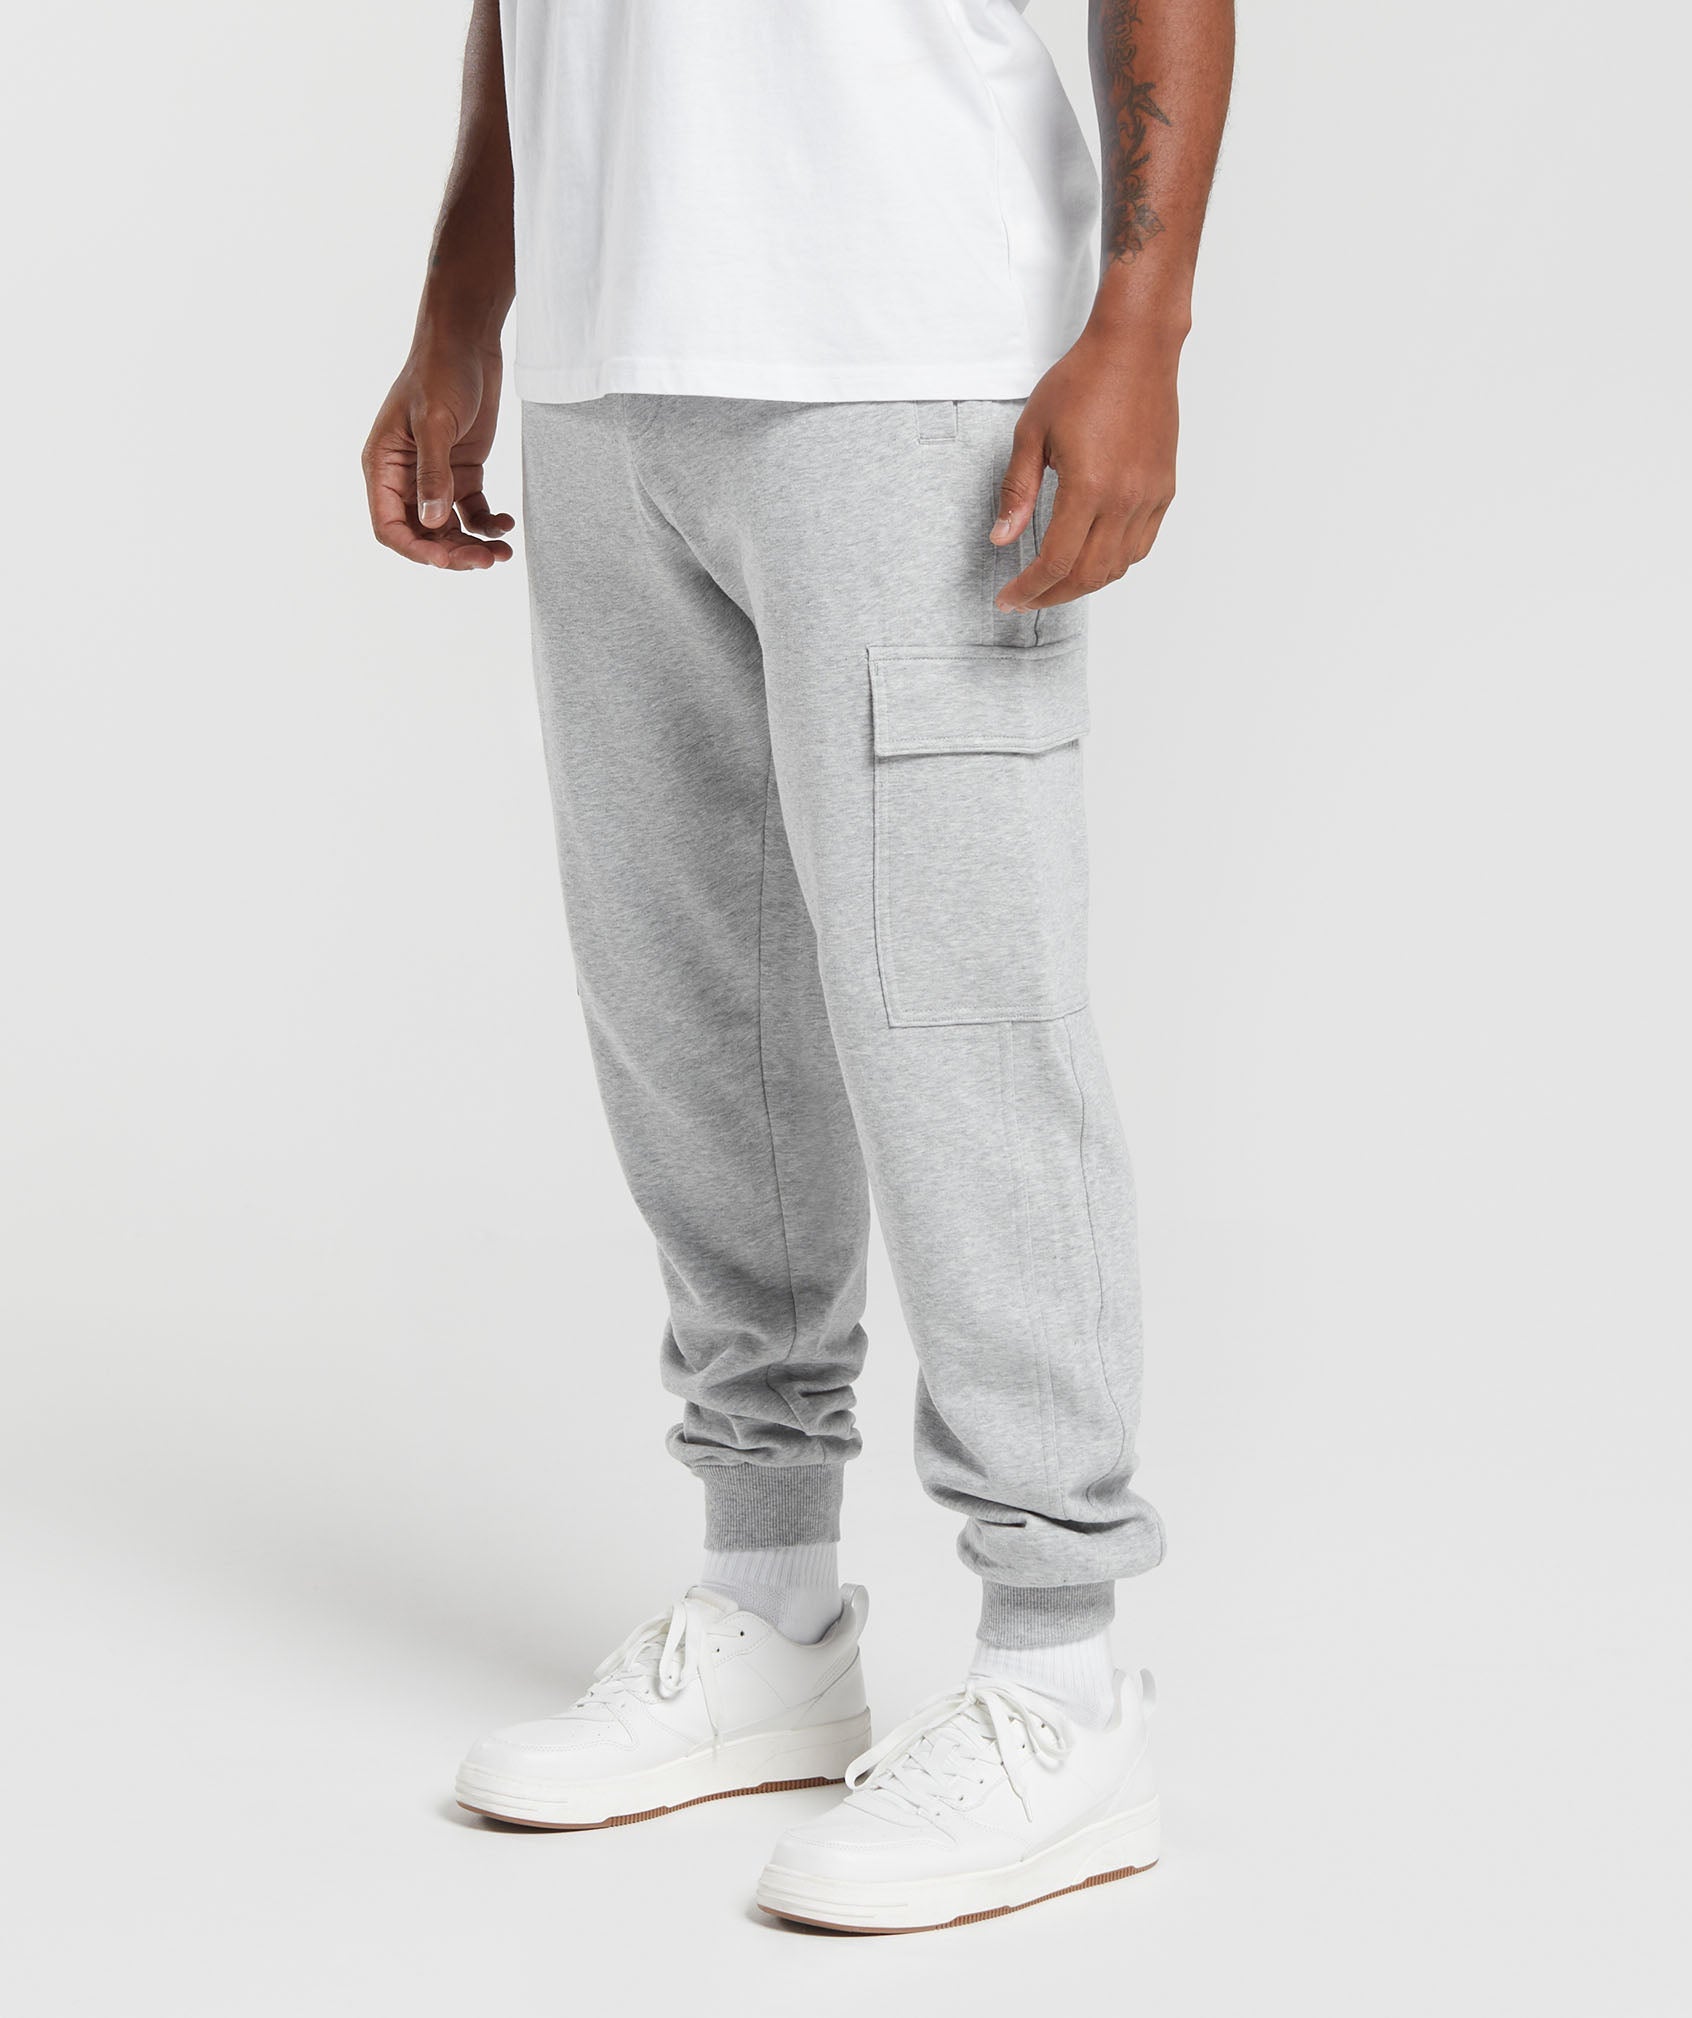 Rest Day Essentials Cargo Joggers in Light Grey Core Marl - view 3